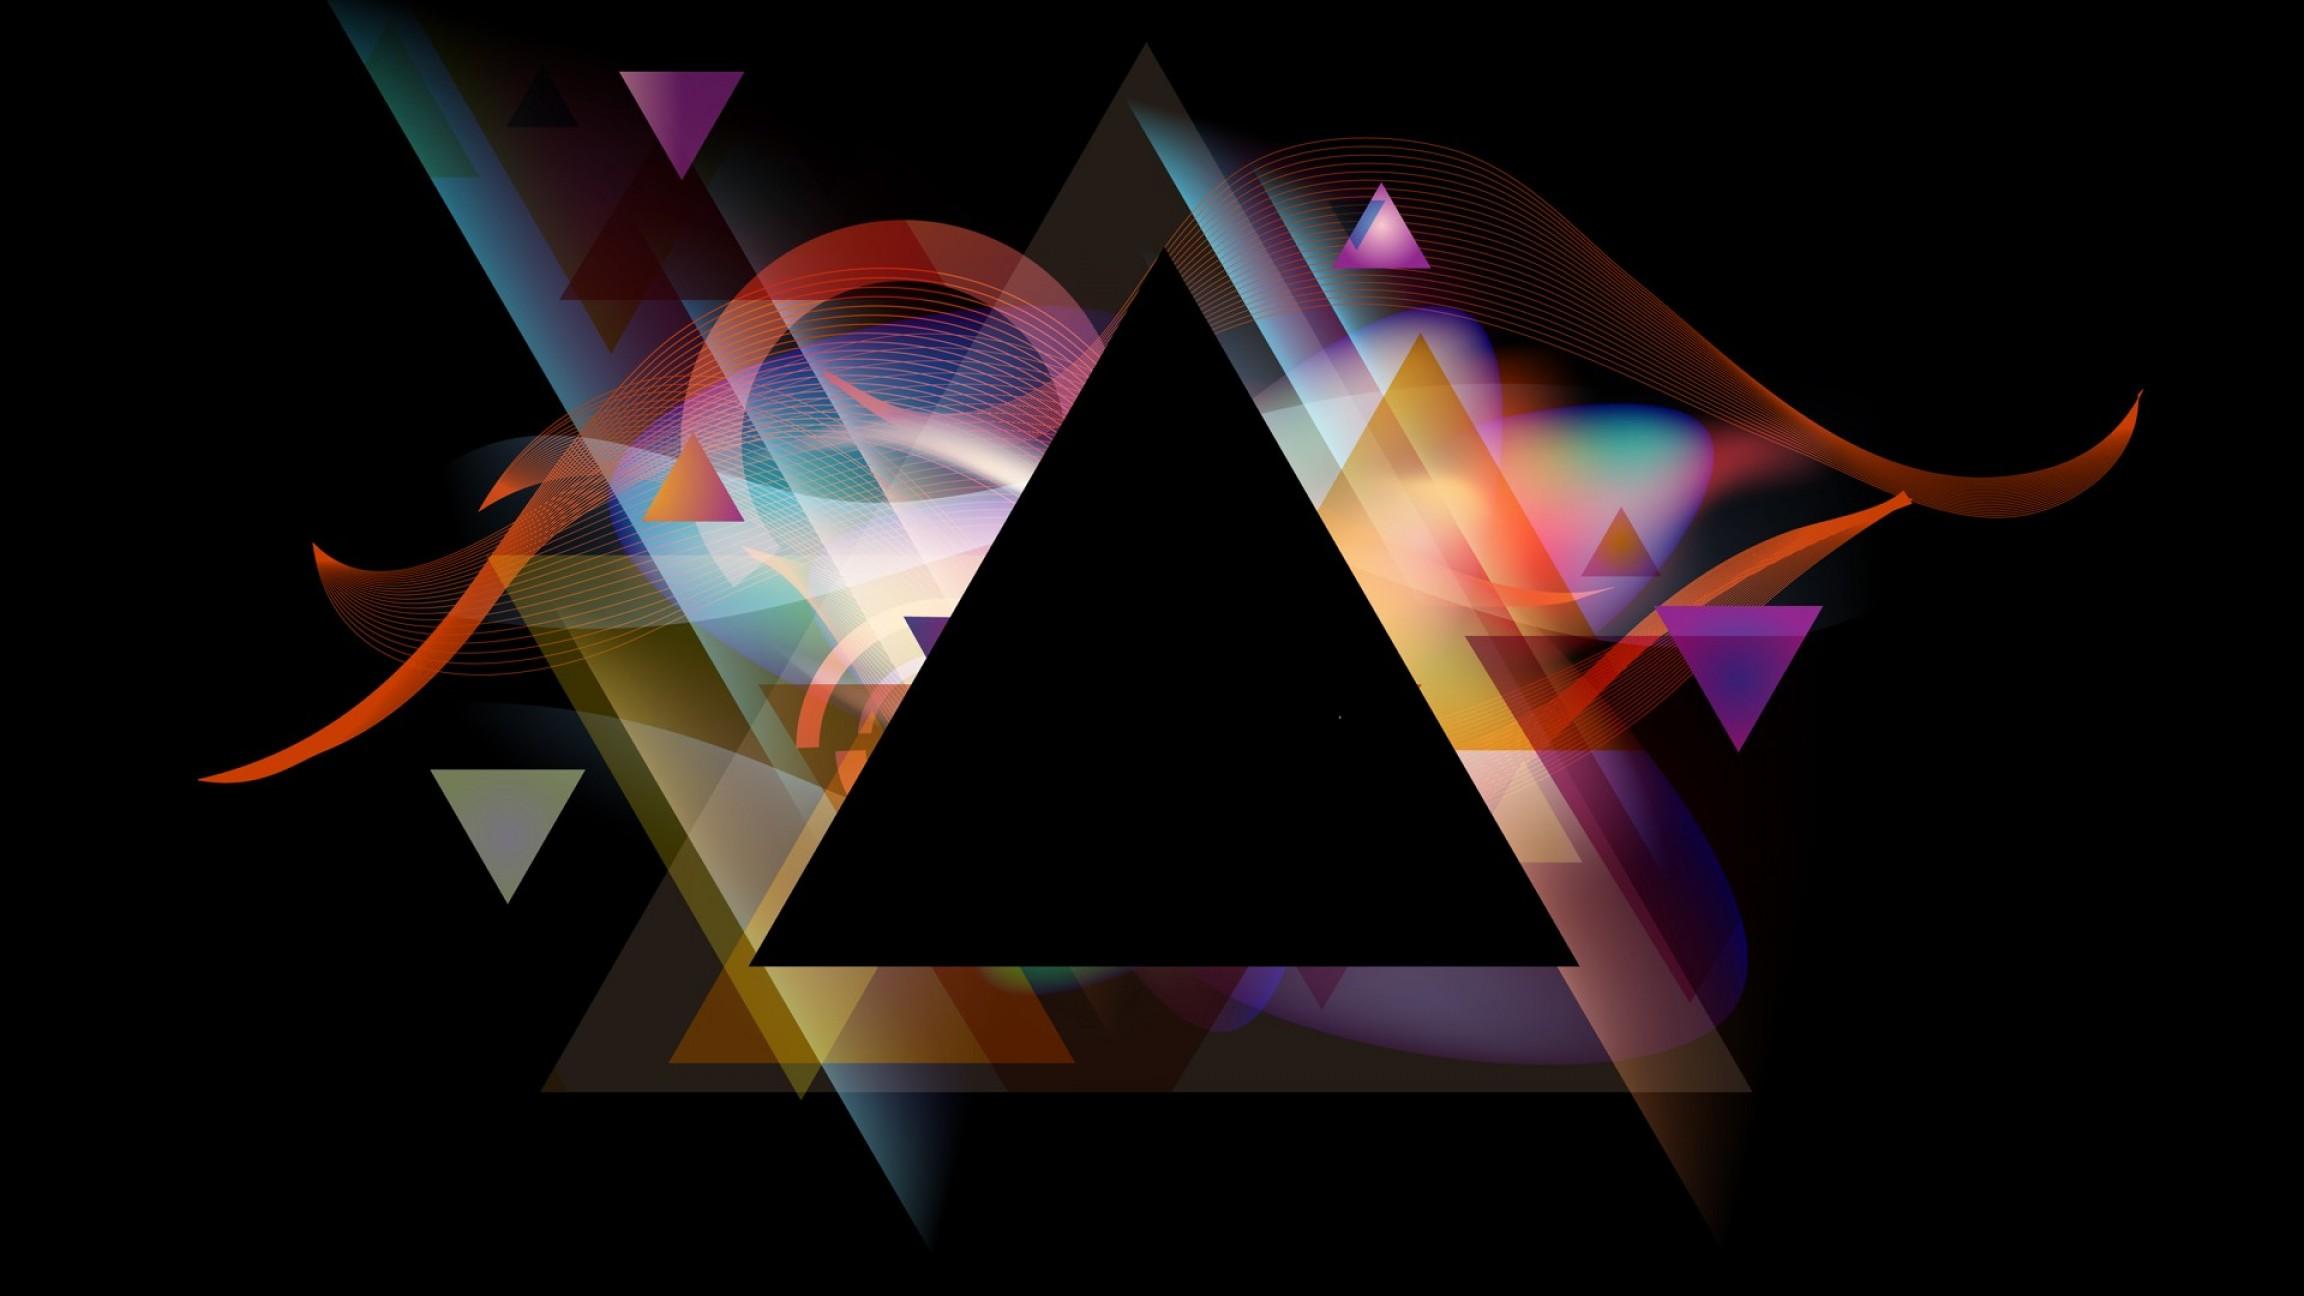 Abstract Triangles Wallpaper, Free Stock Wallpaper